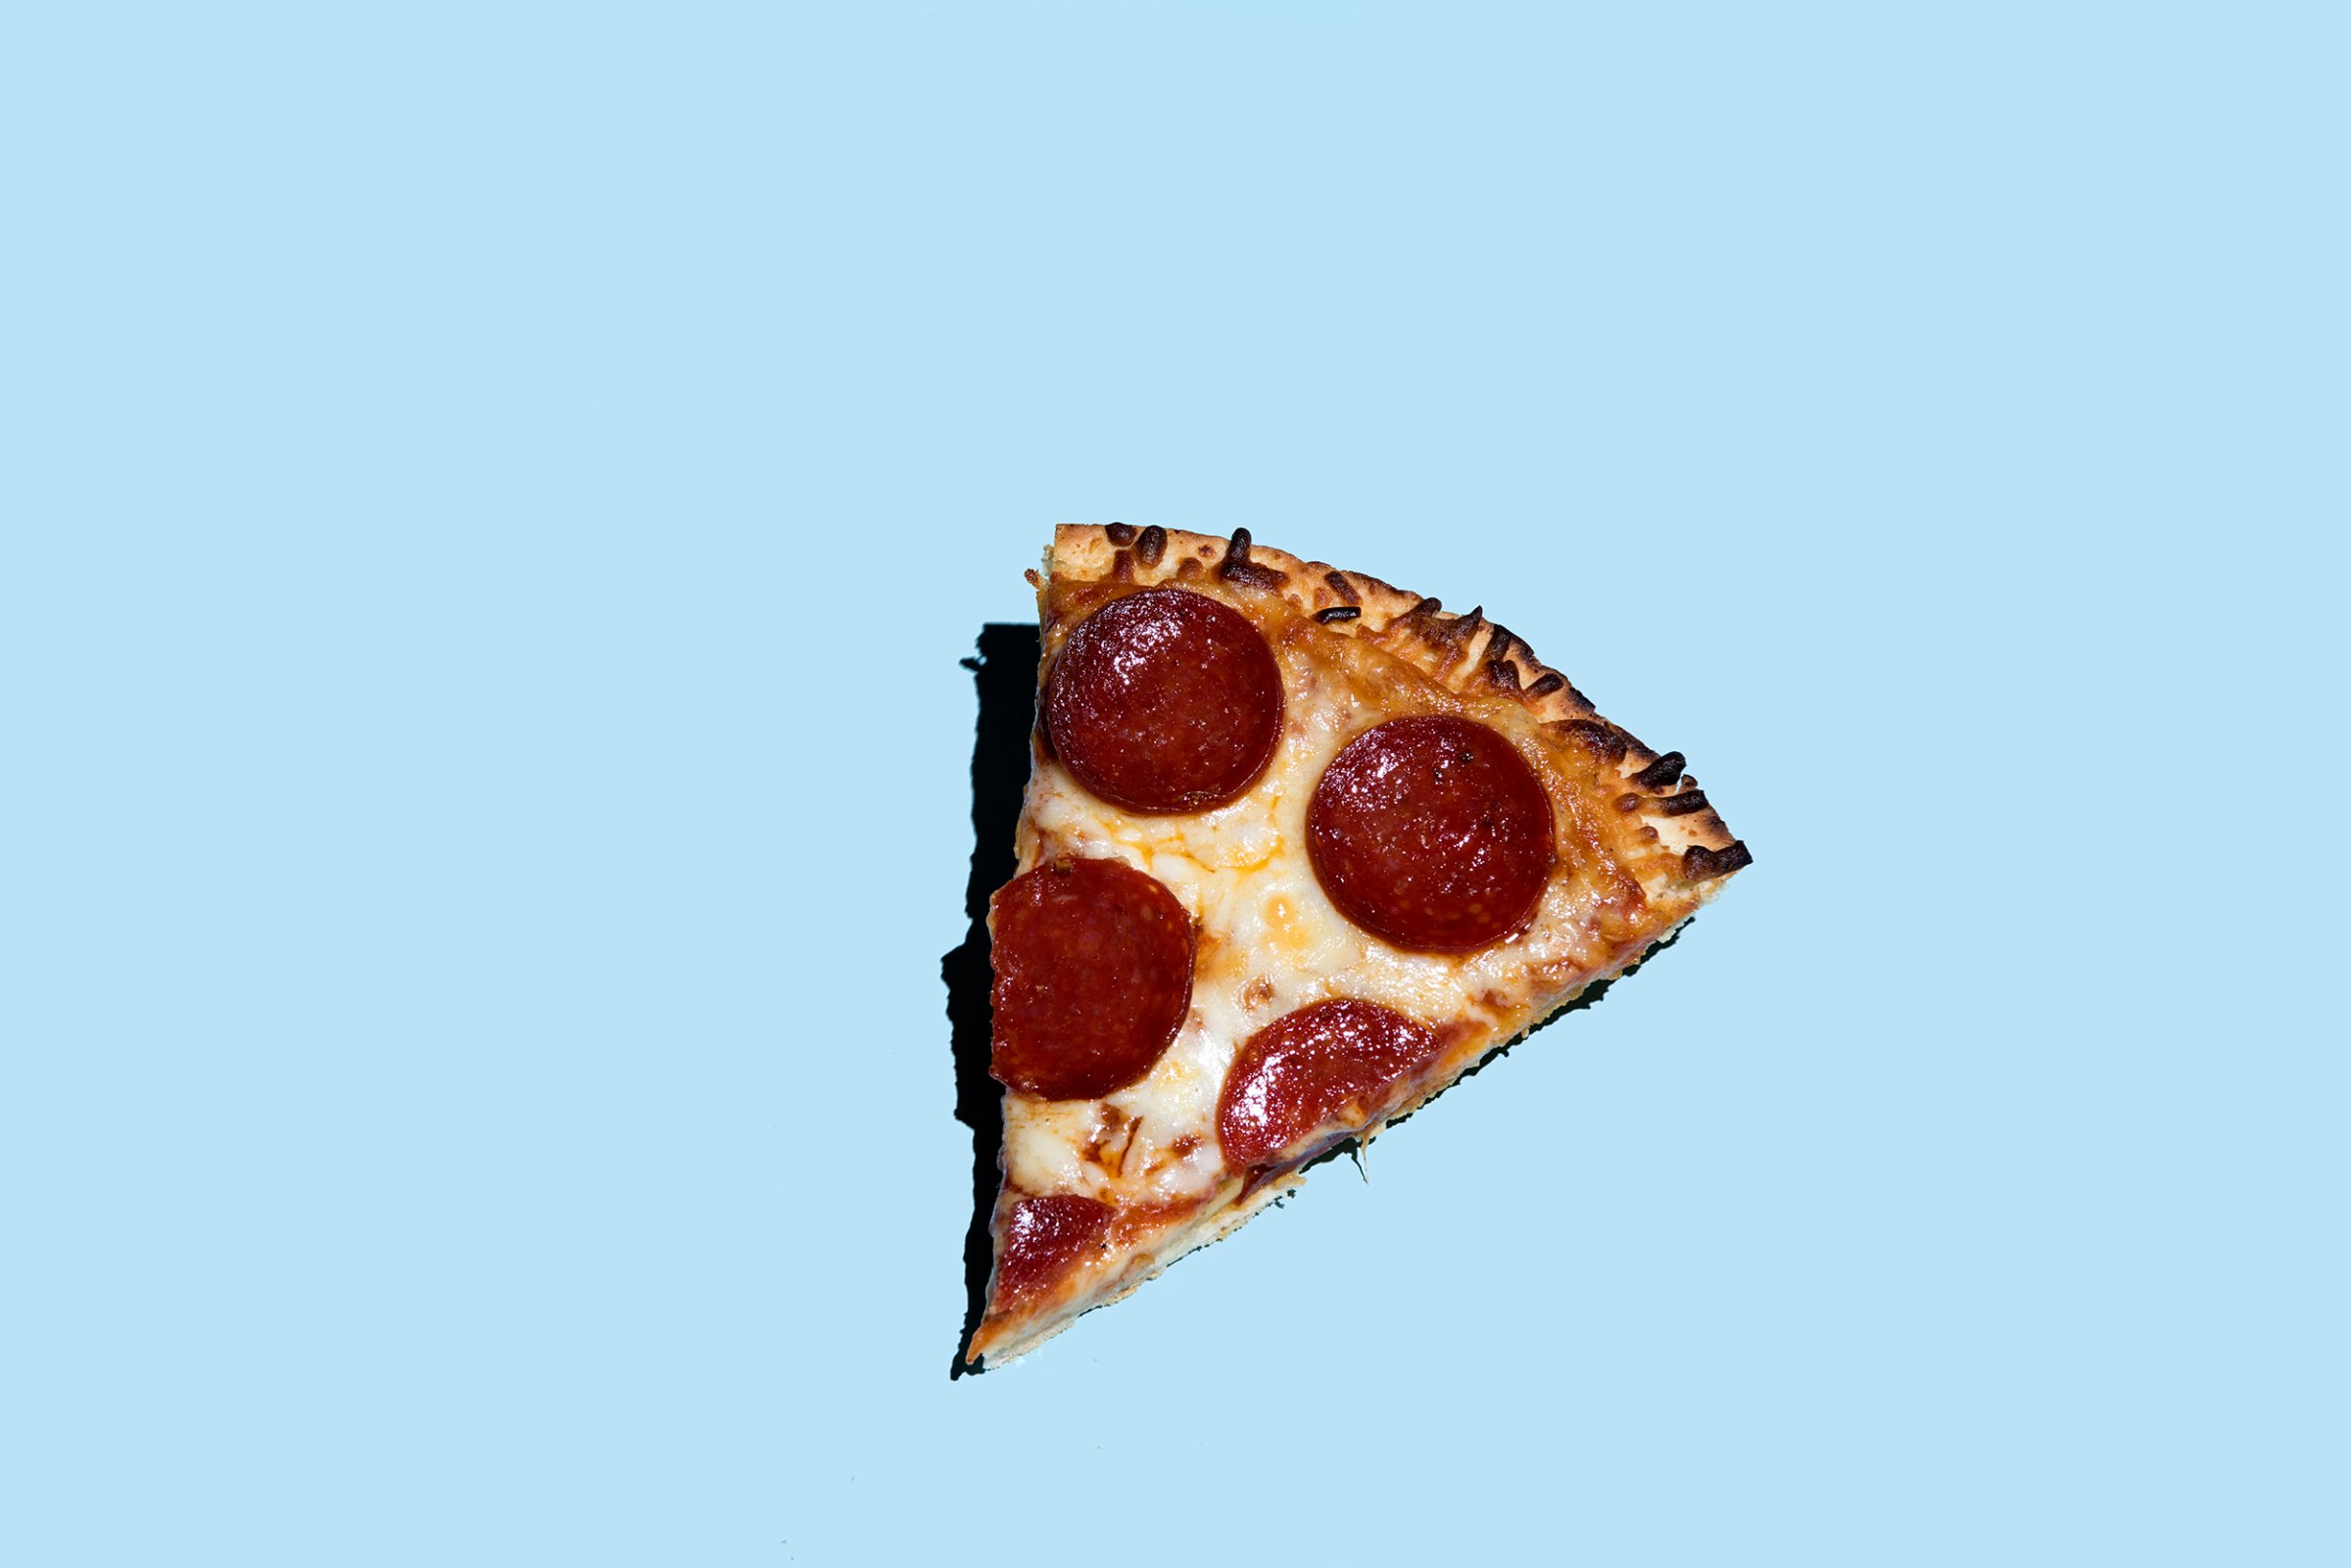 pizza-slice-pepperoni-cheese-junk-food-diet-health-motto-stock